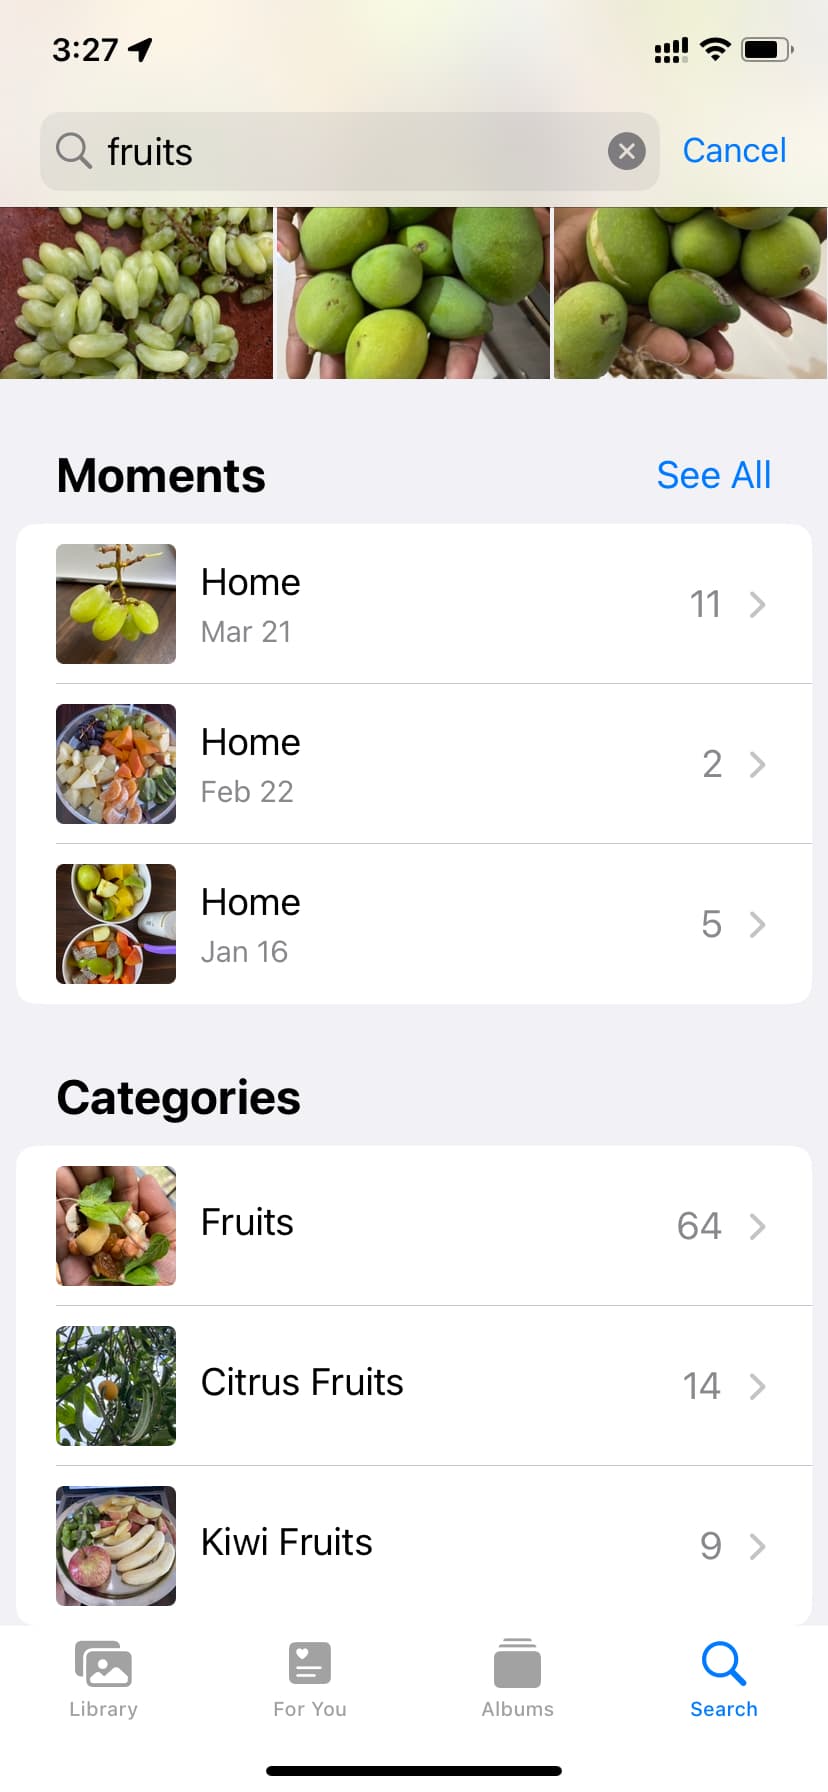 Searching for fruits in iPhone Photos app